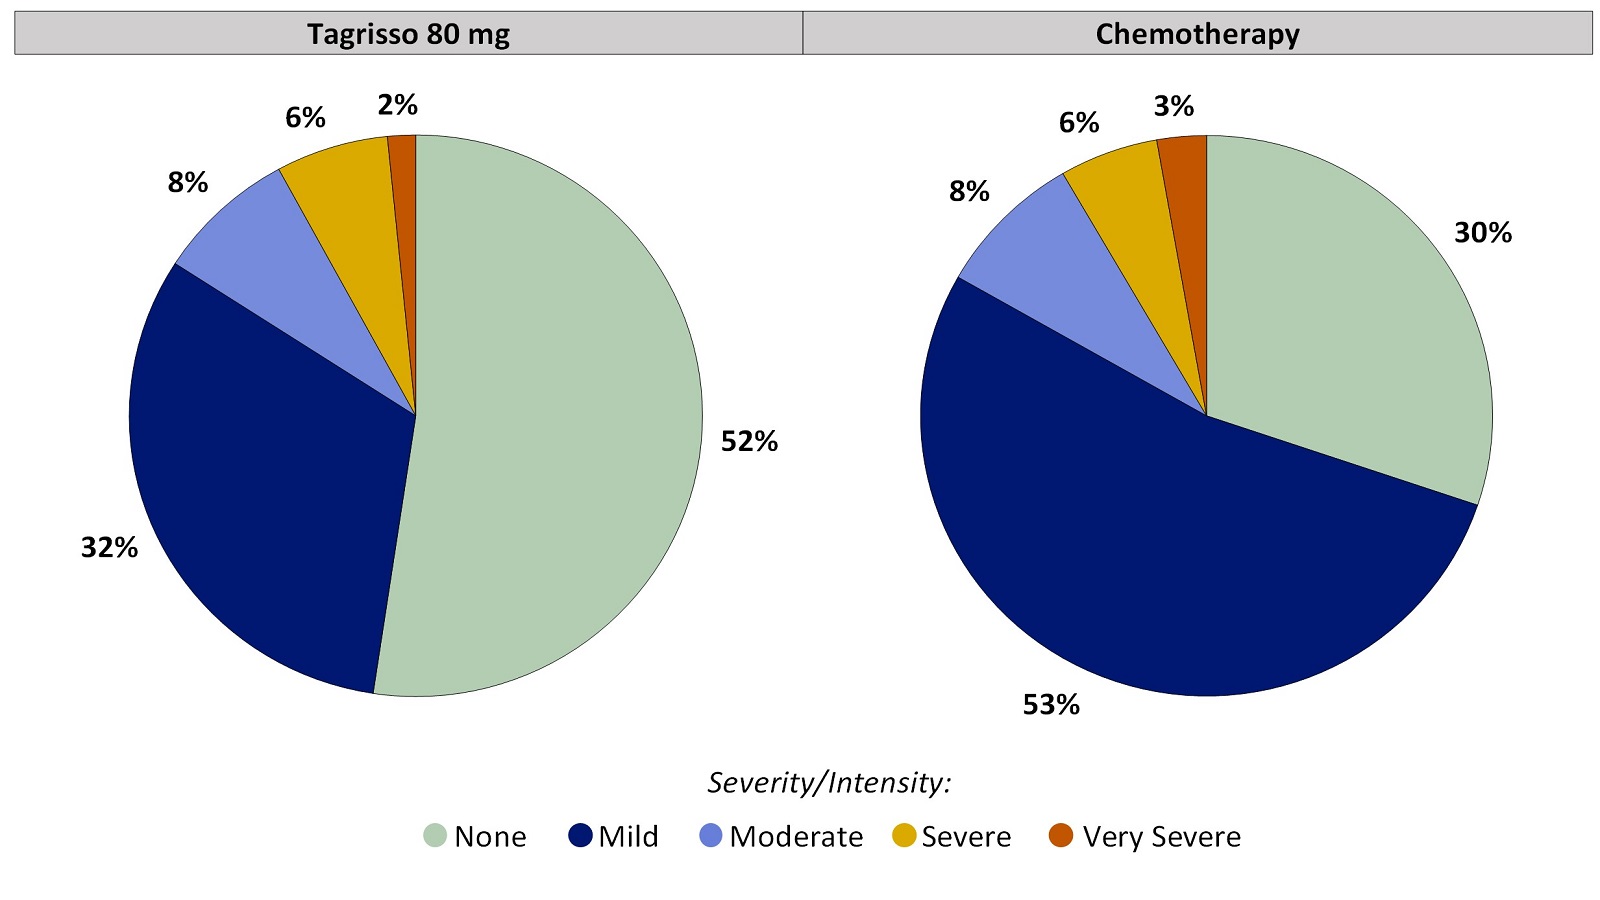 Two pie charts, one for Tagrisso and the other for chemotherapy, which includes only those patients who had no mouth or throat sores before treatment. The pie charts summarize the percentage of patients by worst reported mouth or throat sores. In the Tagrisso arm, None (52%), Mild (32%), Moderate (8%), Severe (6%) and Very severe (2%). In the chemotherapy arm, None (30%), Mild (53%), Moderate (8%), Severe (6%) and Very severe (3%).